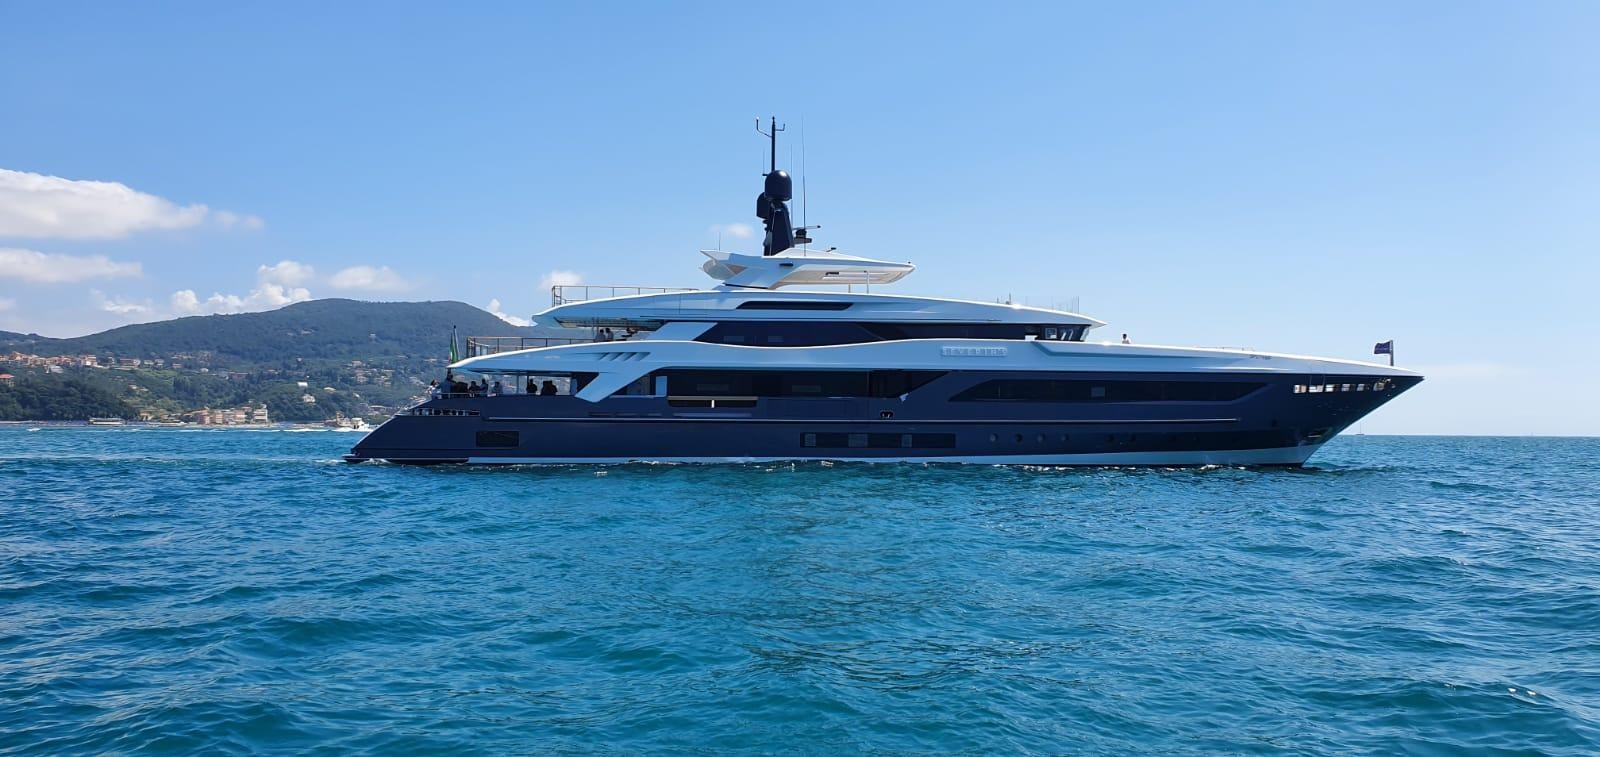 First sea-trial for M/Y Severin°s after the spectacular launch on July 6th